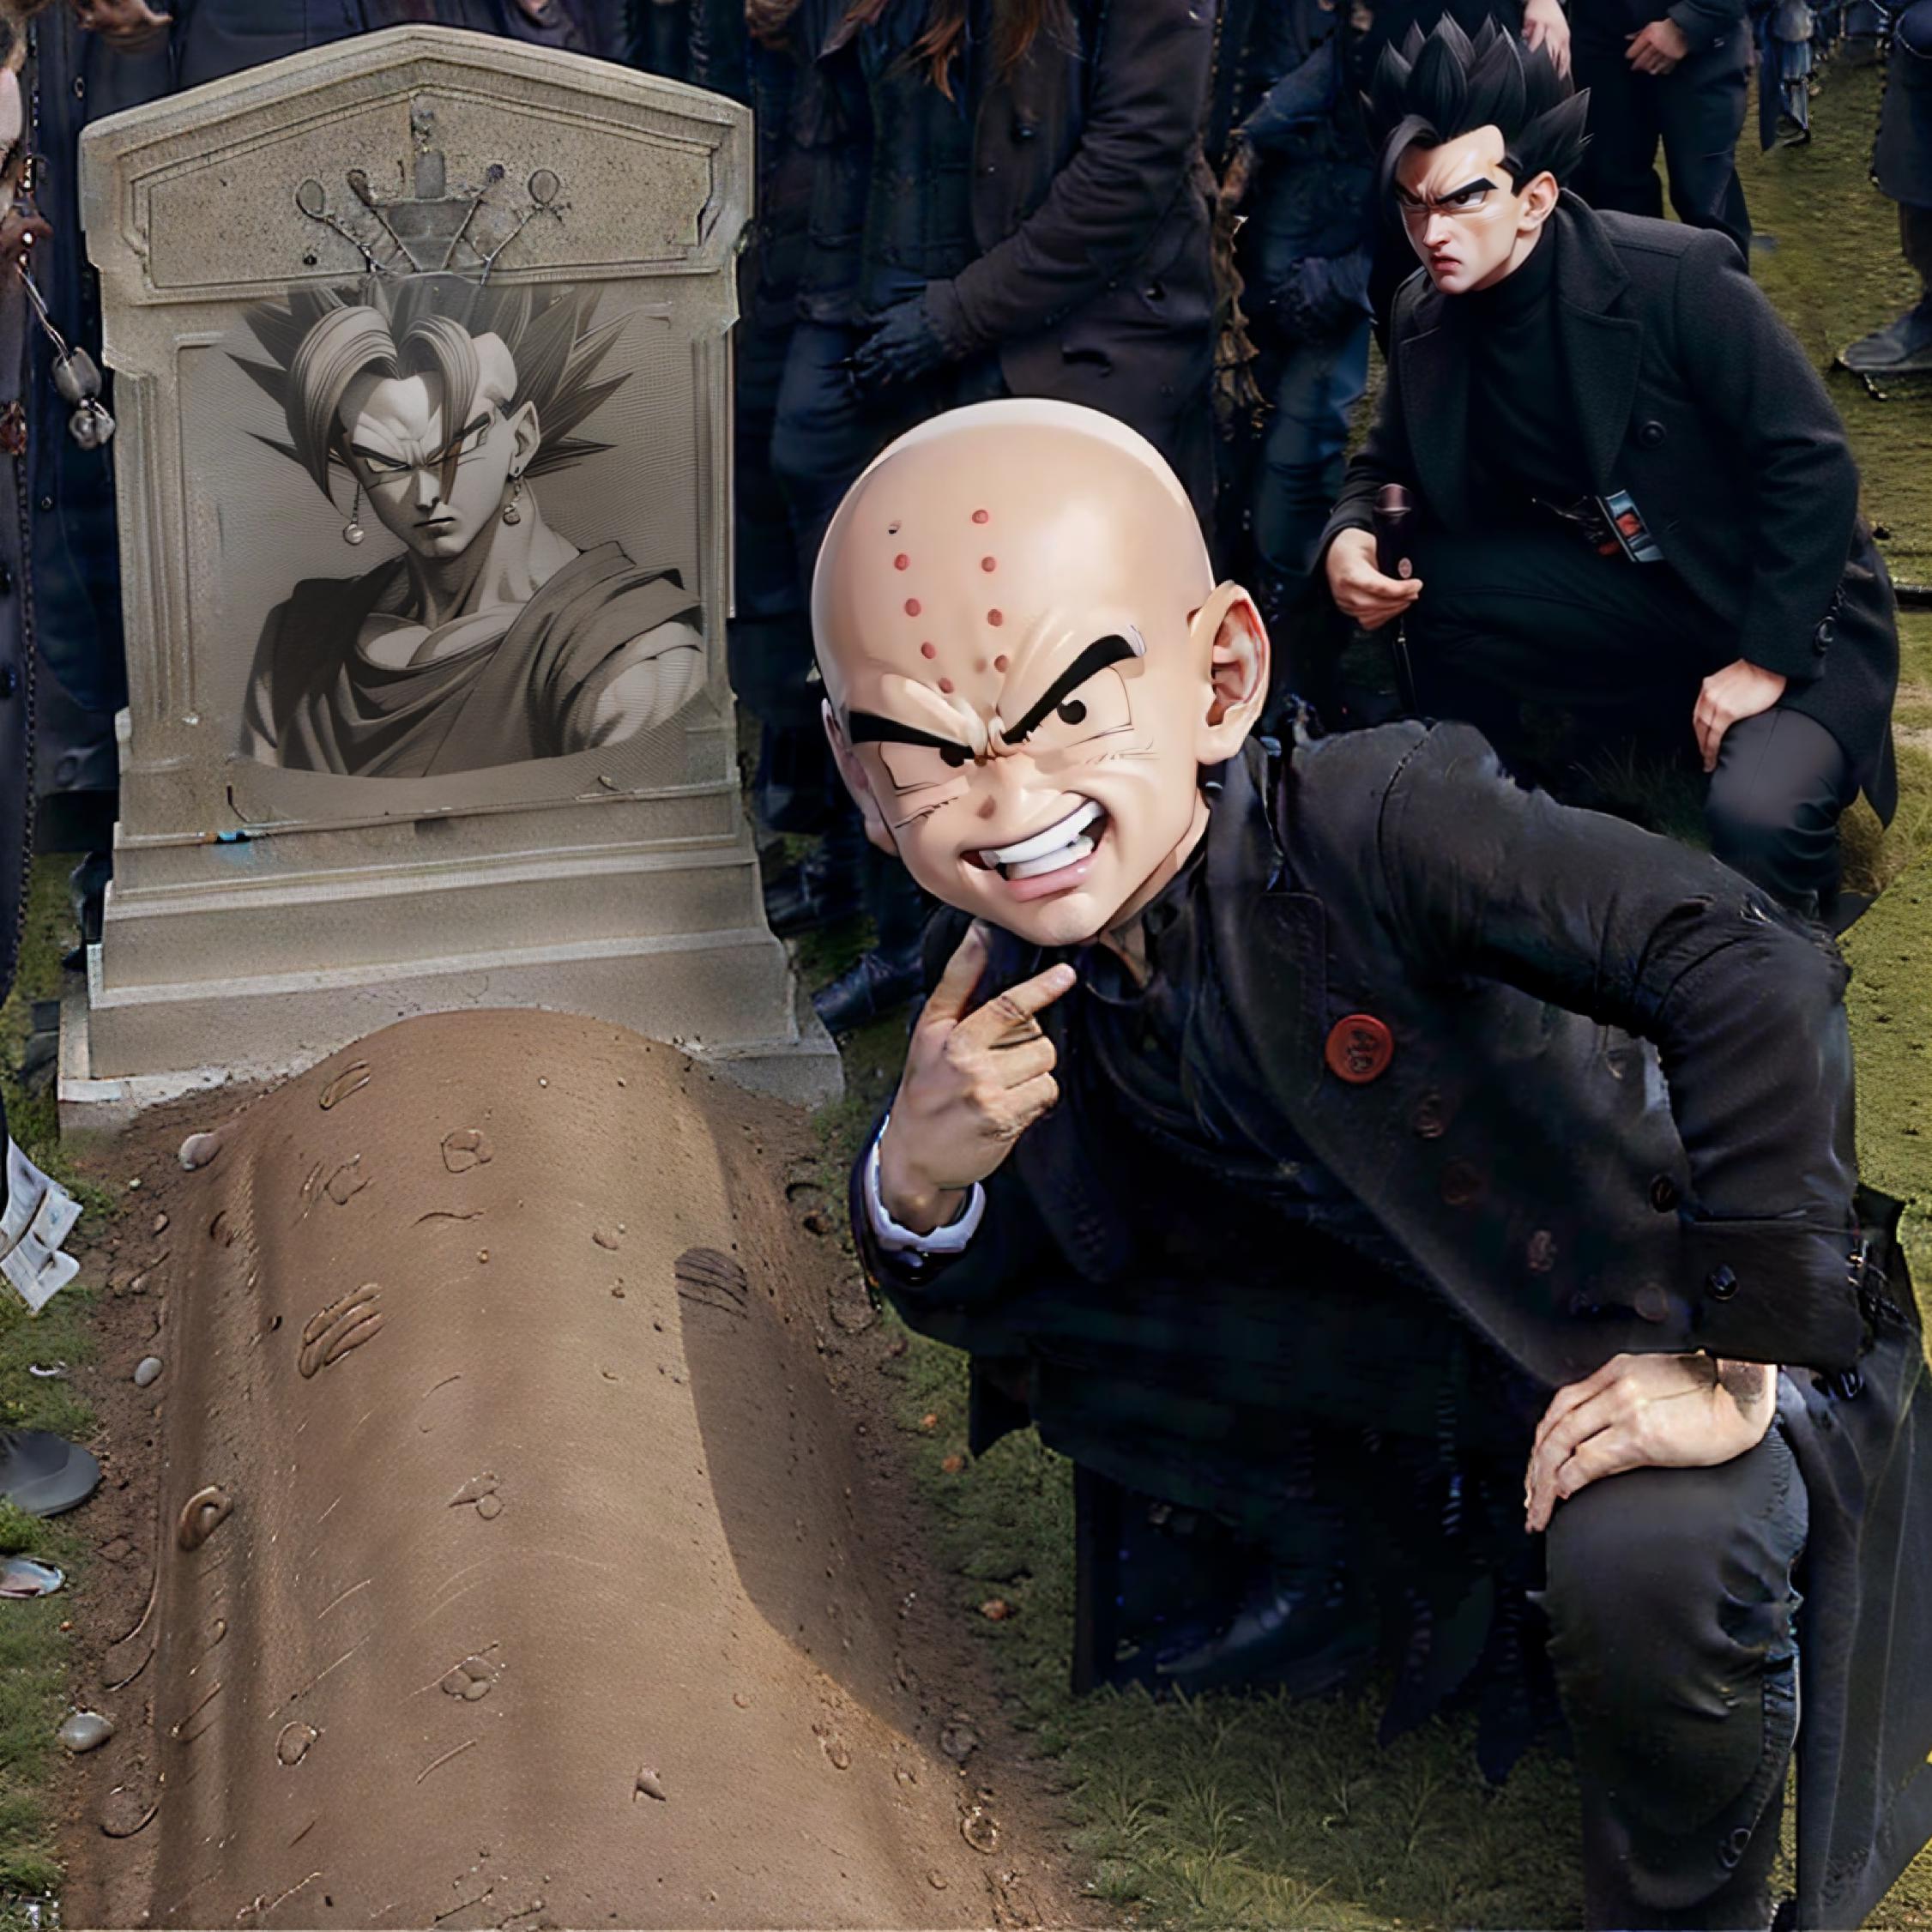 Grant Gustin Next To Oliver Queens Grave Meme | Concept LoRA image by yomama123556778